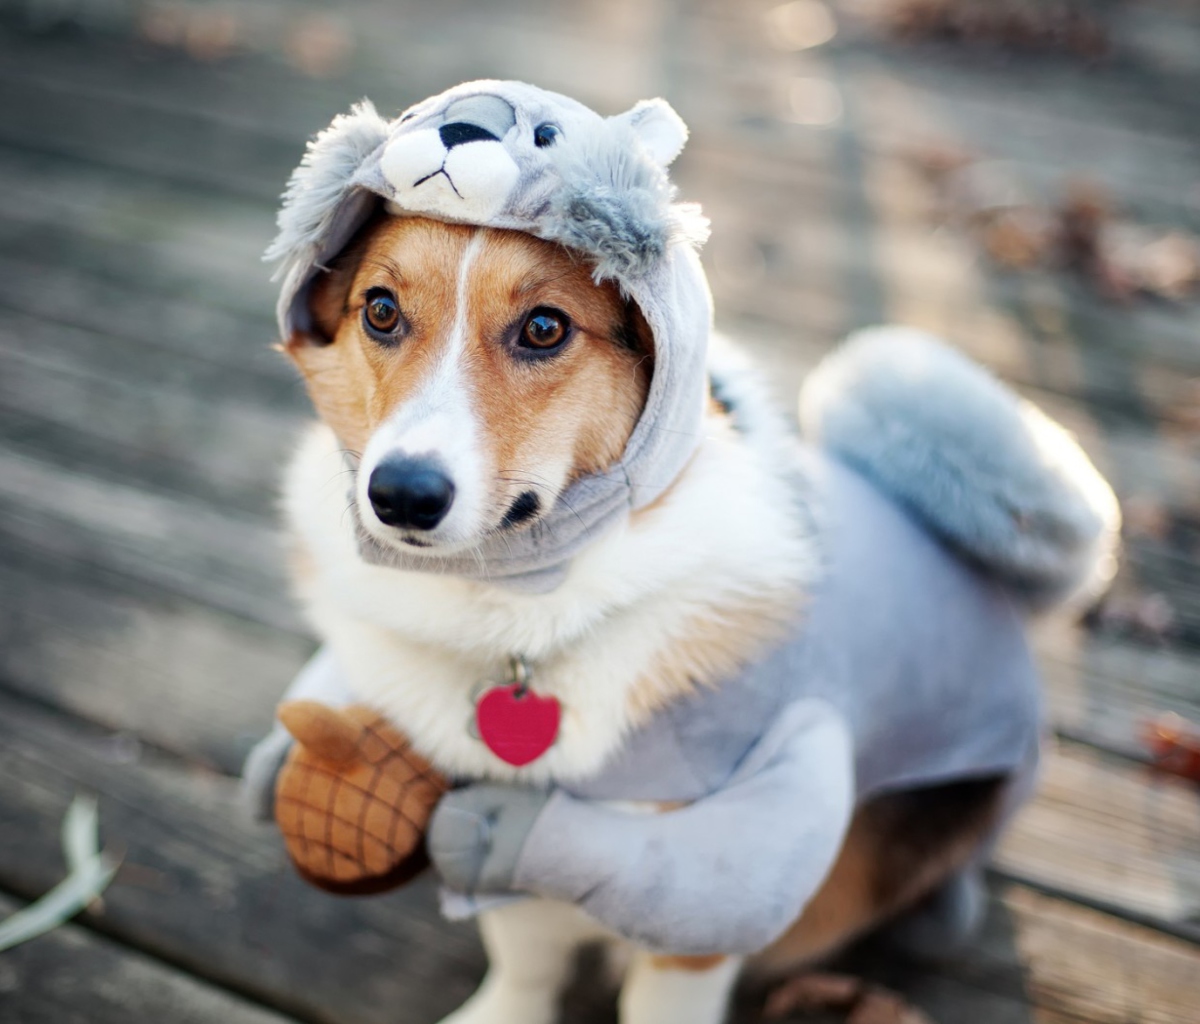 Dog In Funny Costume wallpaper 1200x1024